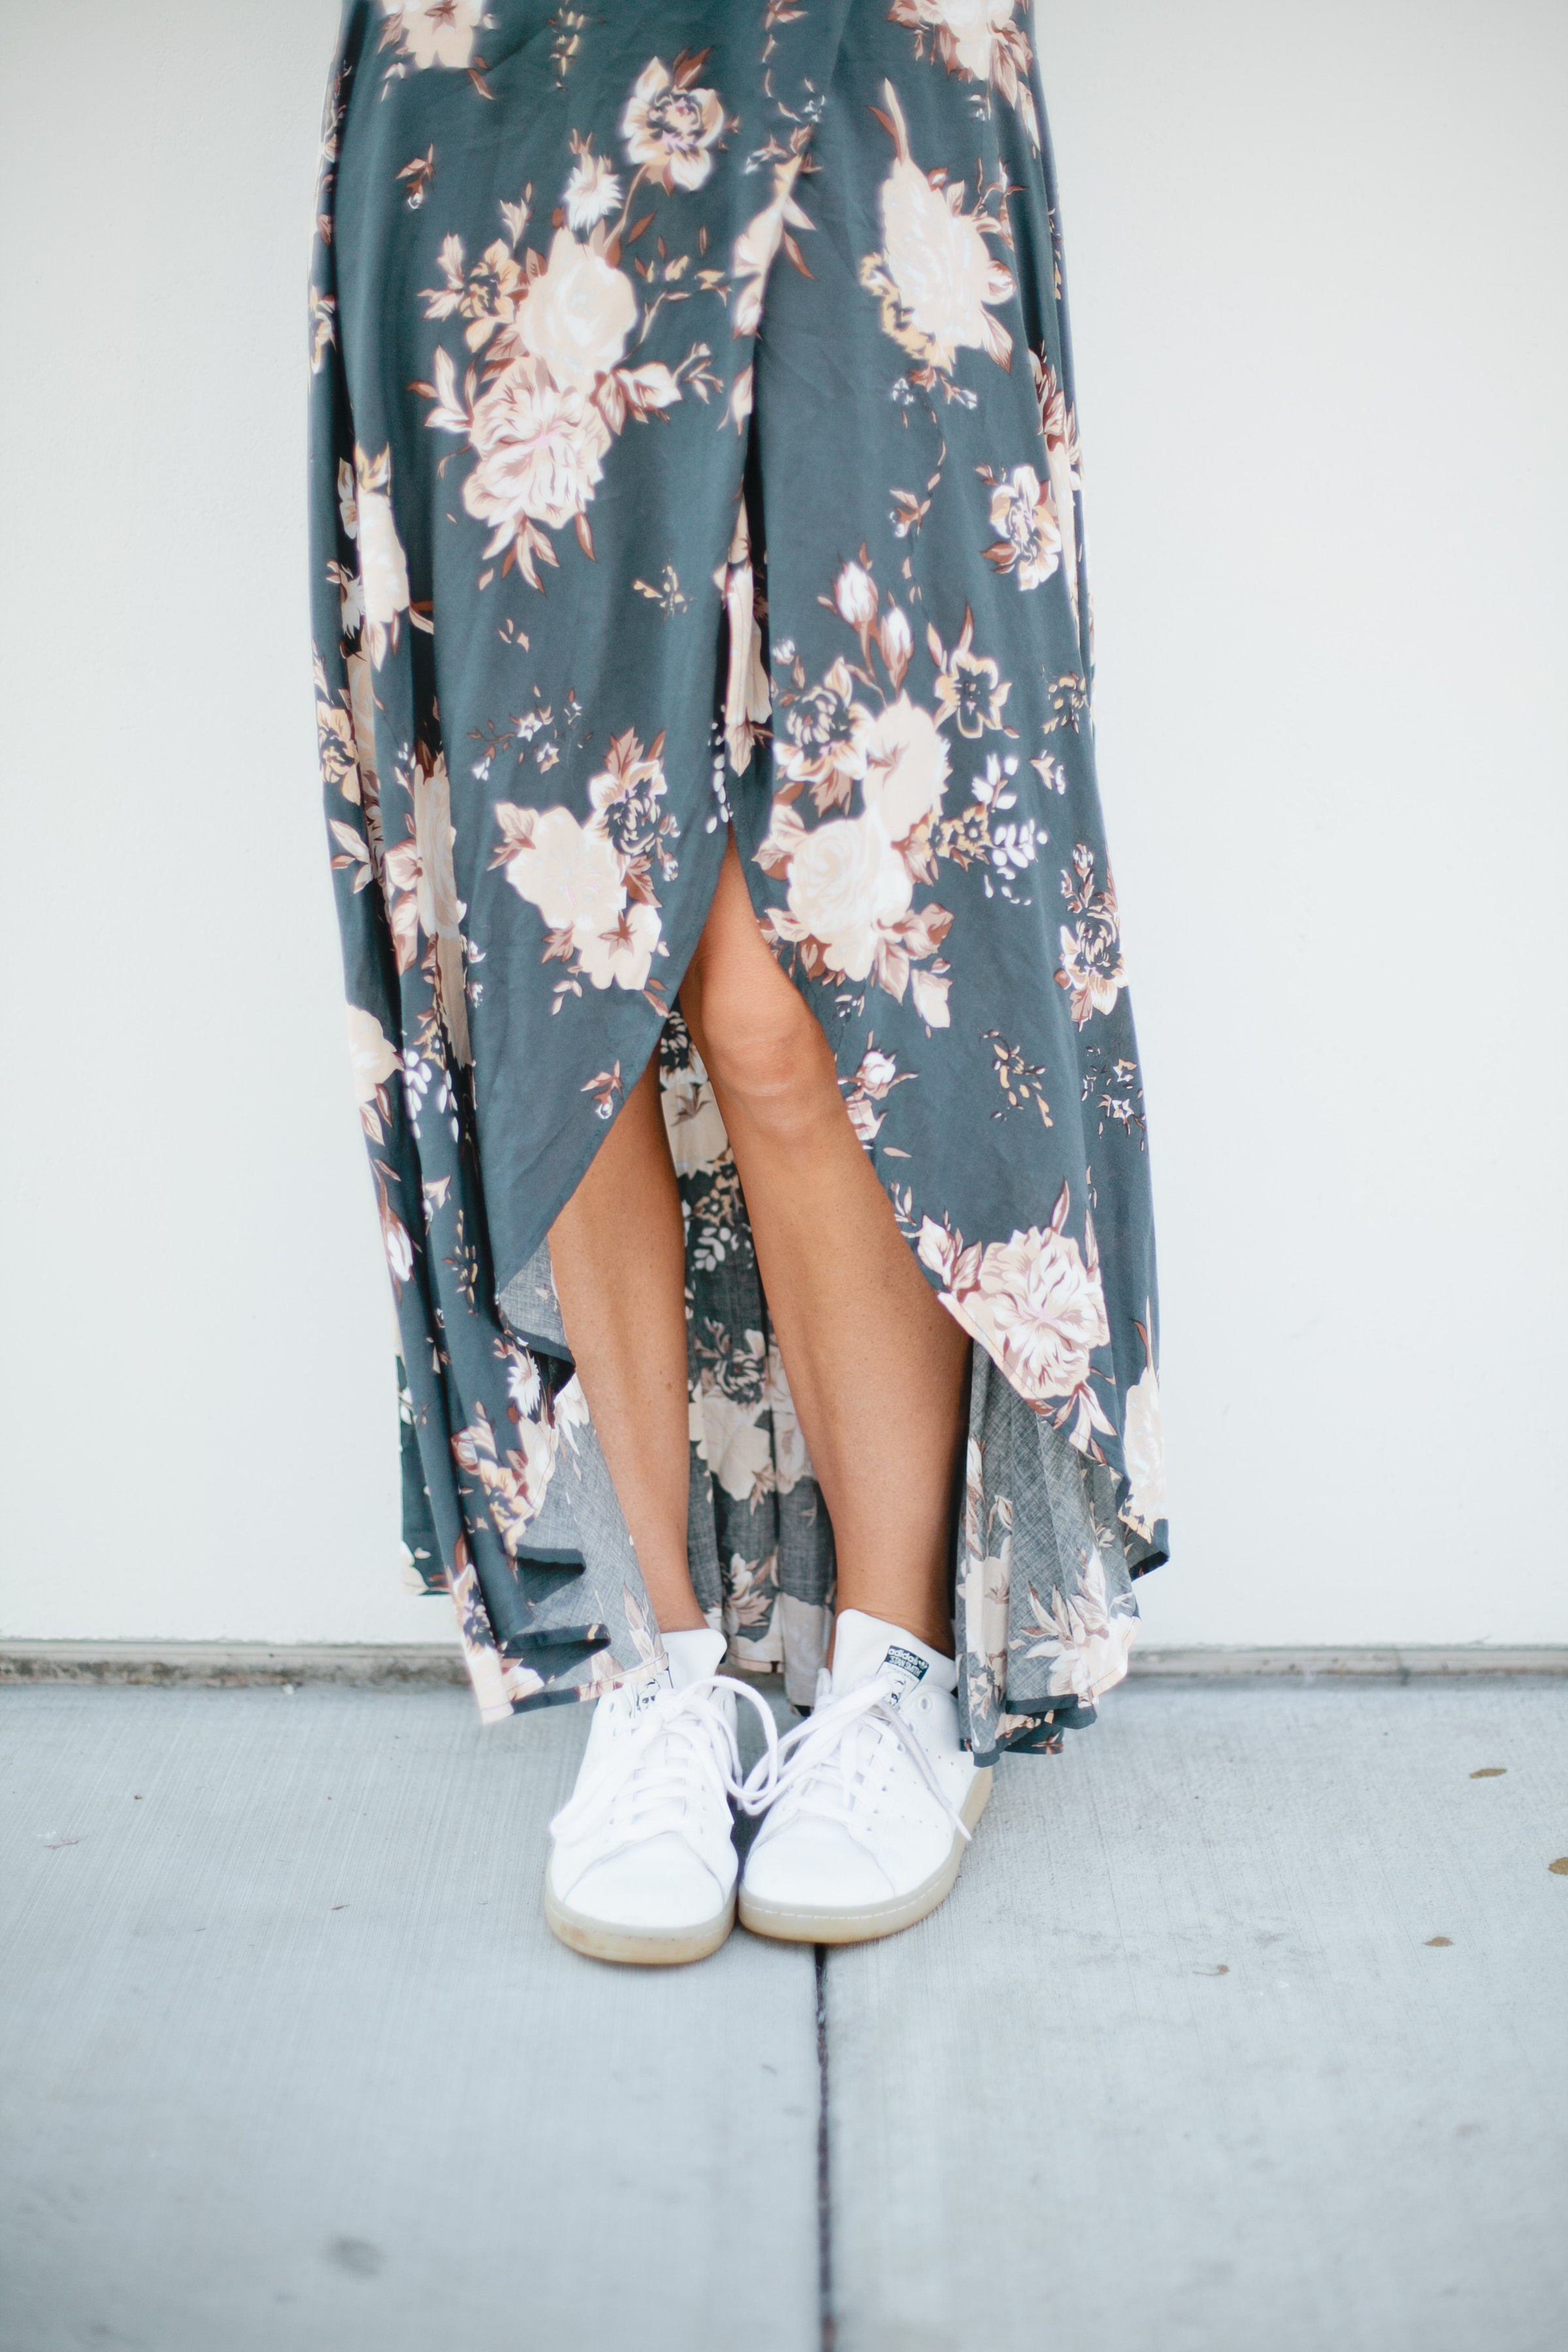 How to wear Dresses with Sneakers